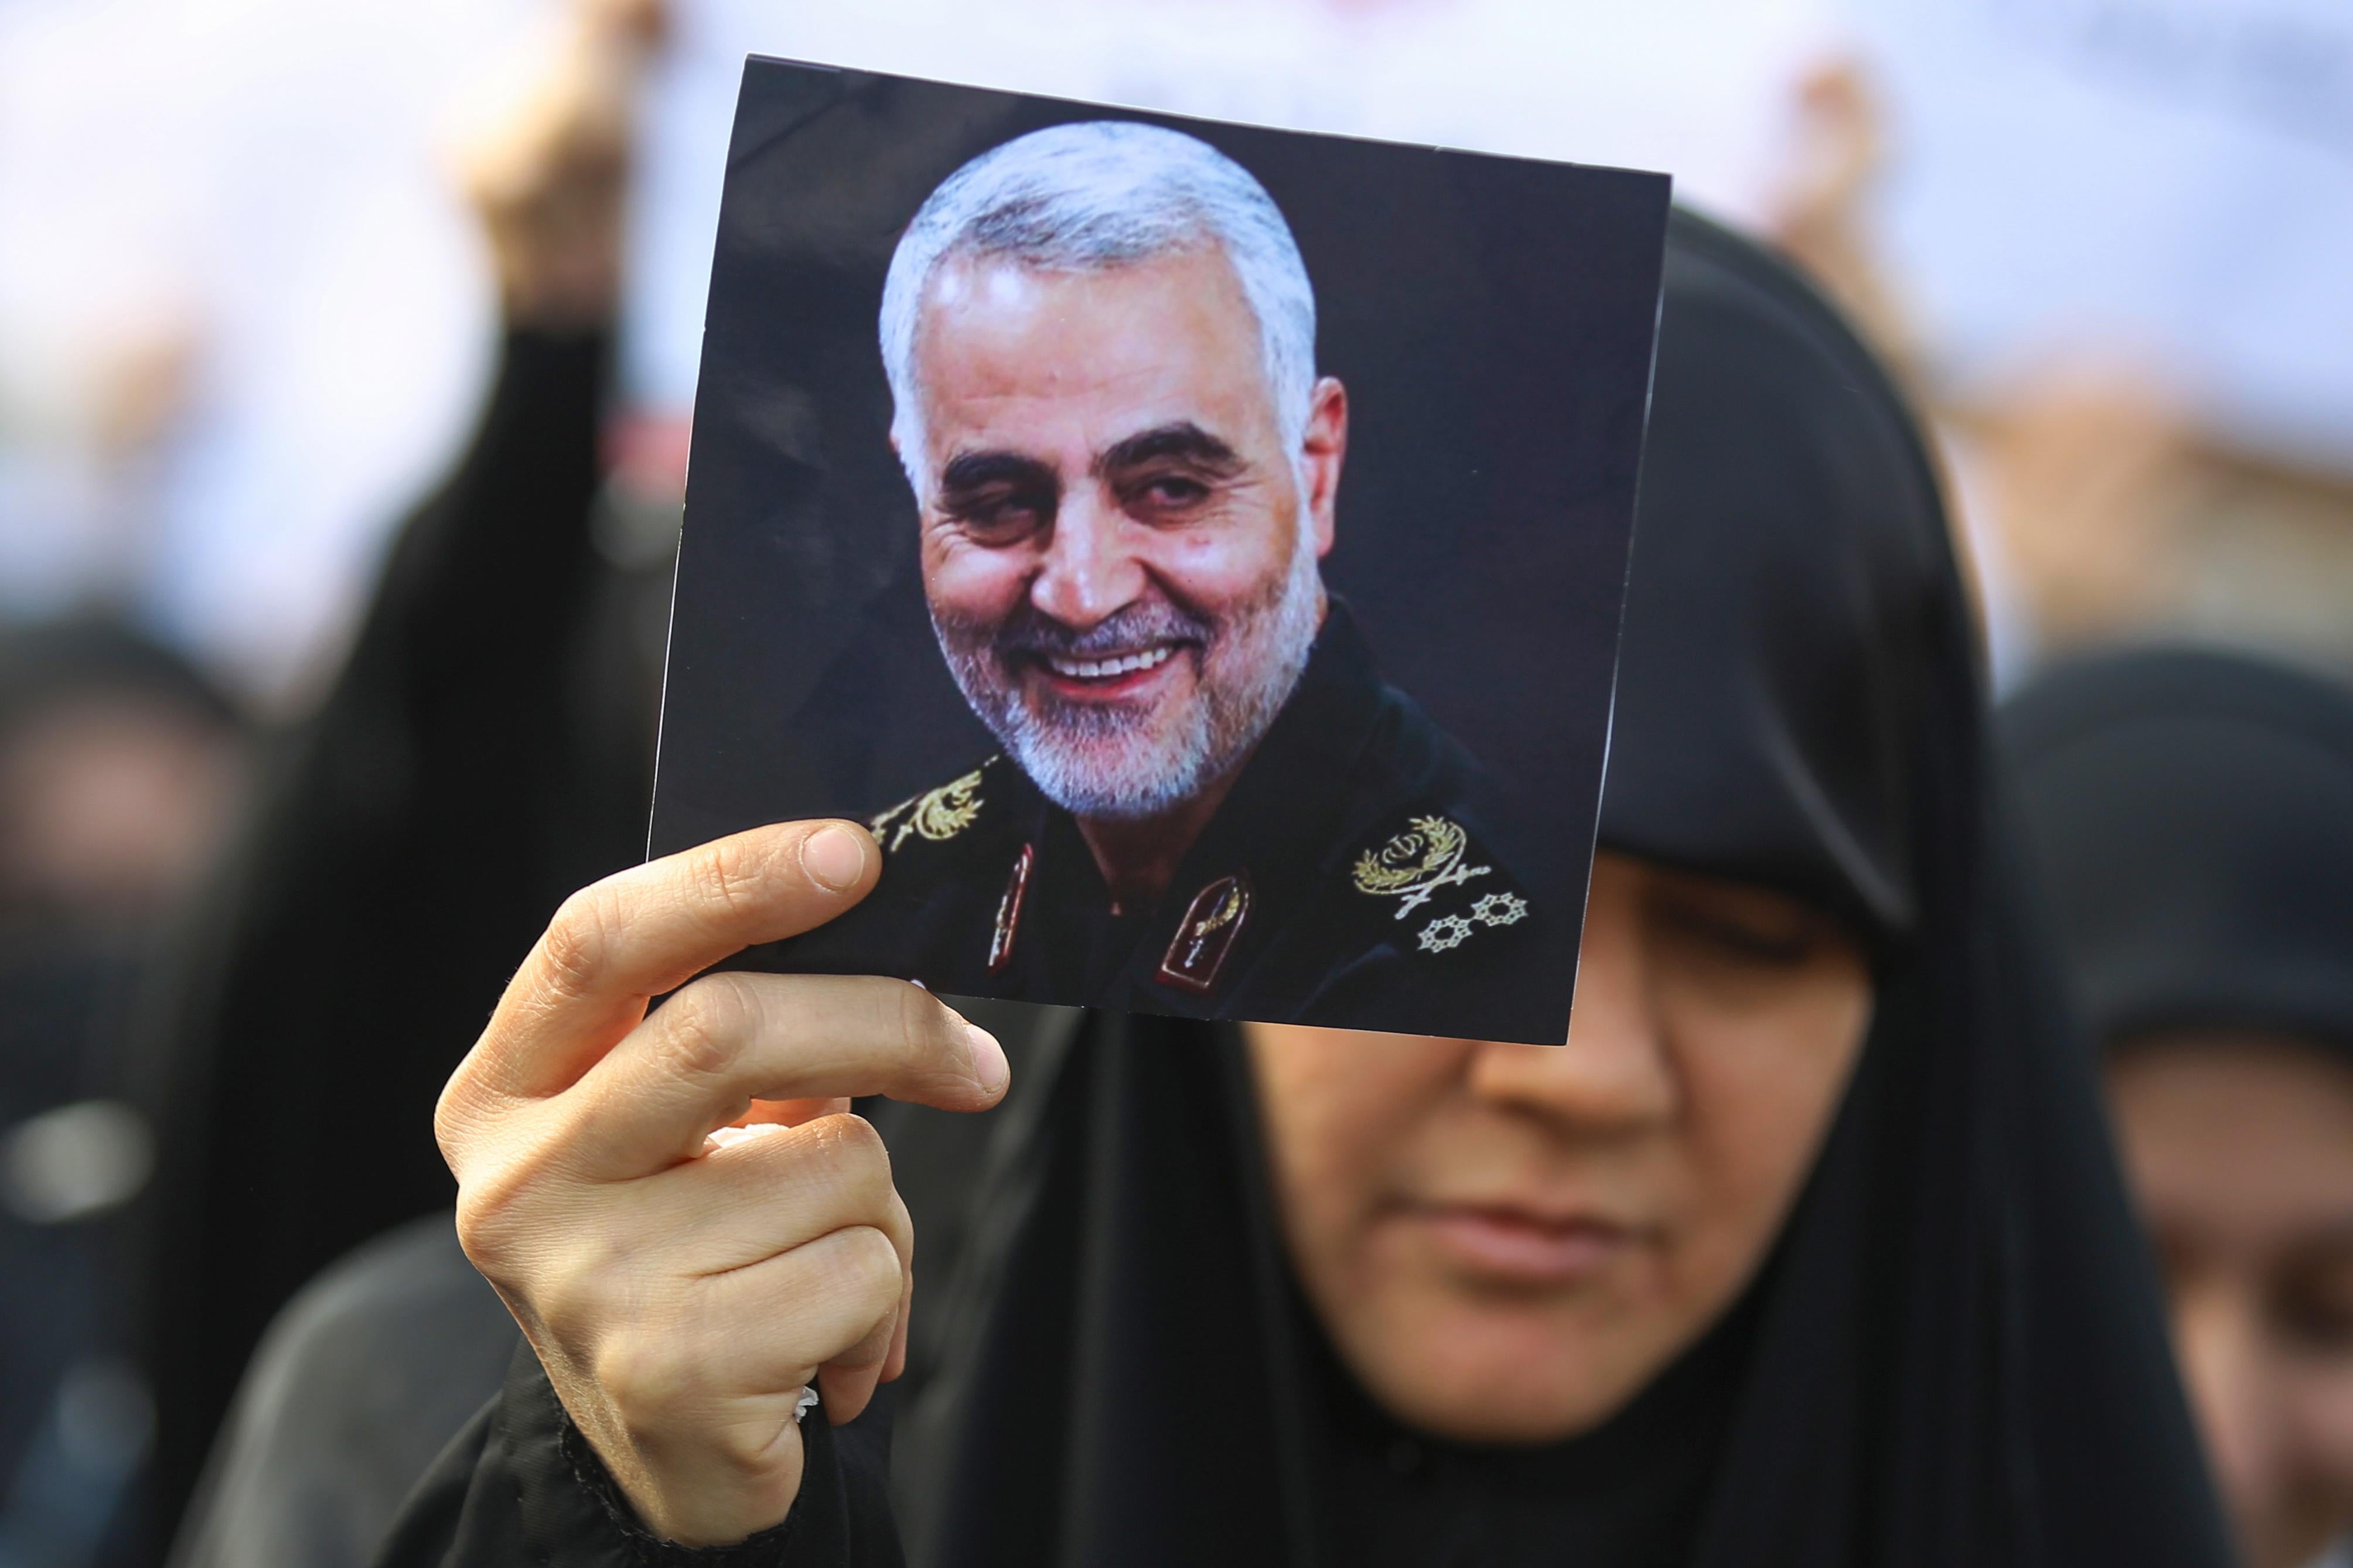 An Iraqi woman attends the funeral of Iranian military commander Qasem Soleimani (portrait), Iraqi paramilitary chief Abu Mahdi al-Muhandis and eight others in Baghdad's district of al-Jadriya, in Baghdad's high-security Green Zone, on January 4, 2020.